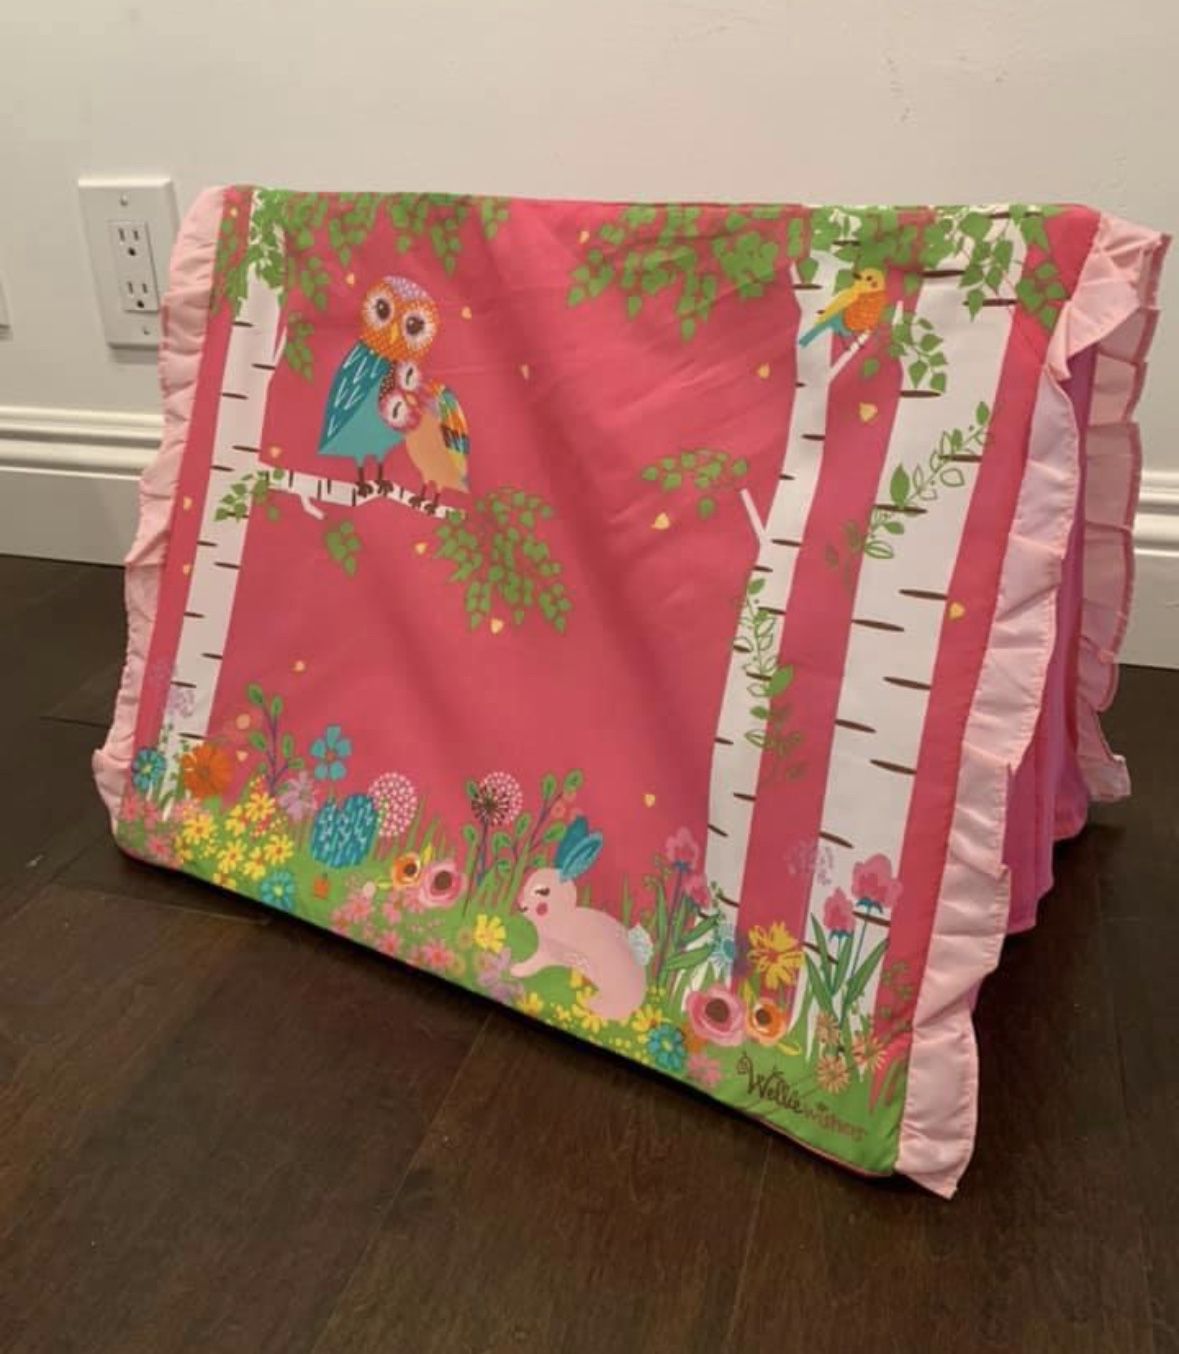 American girl welliewishers doll tent